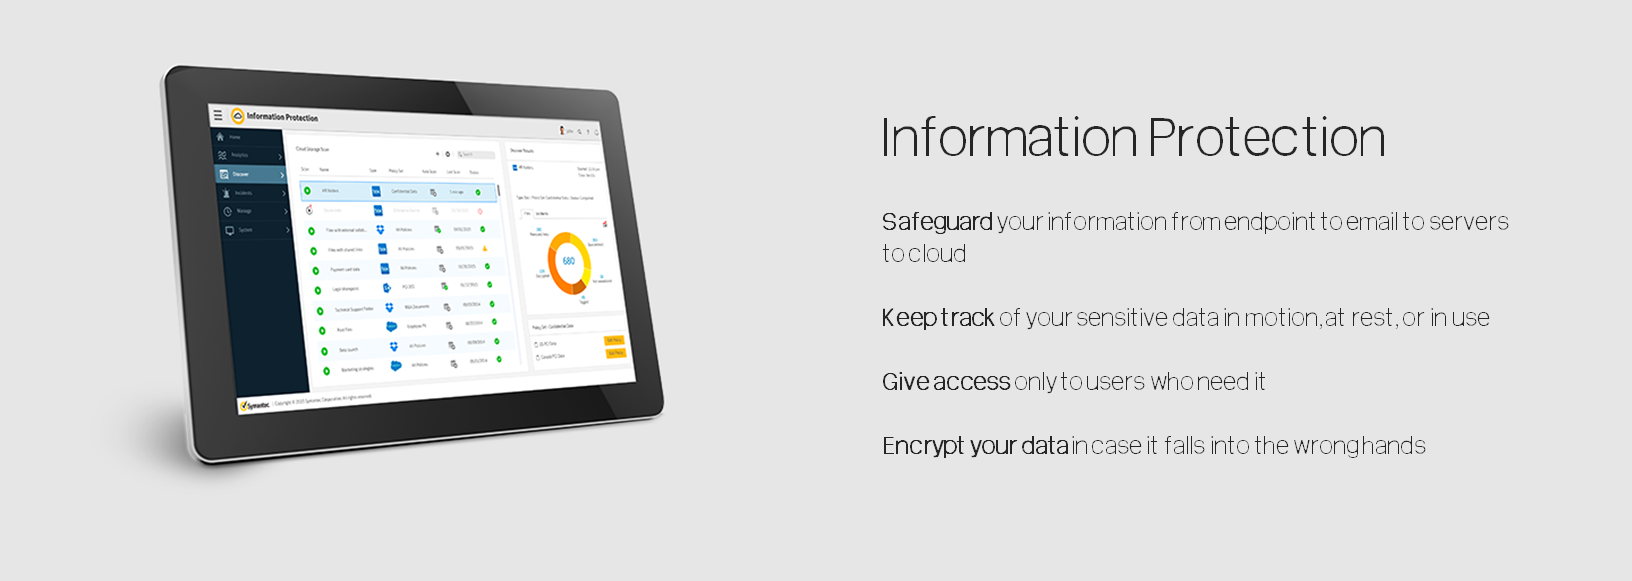 Symantec Information Protection Products & Solutions